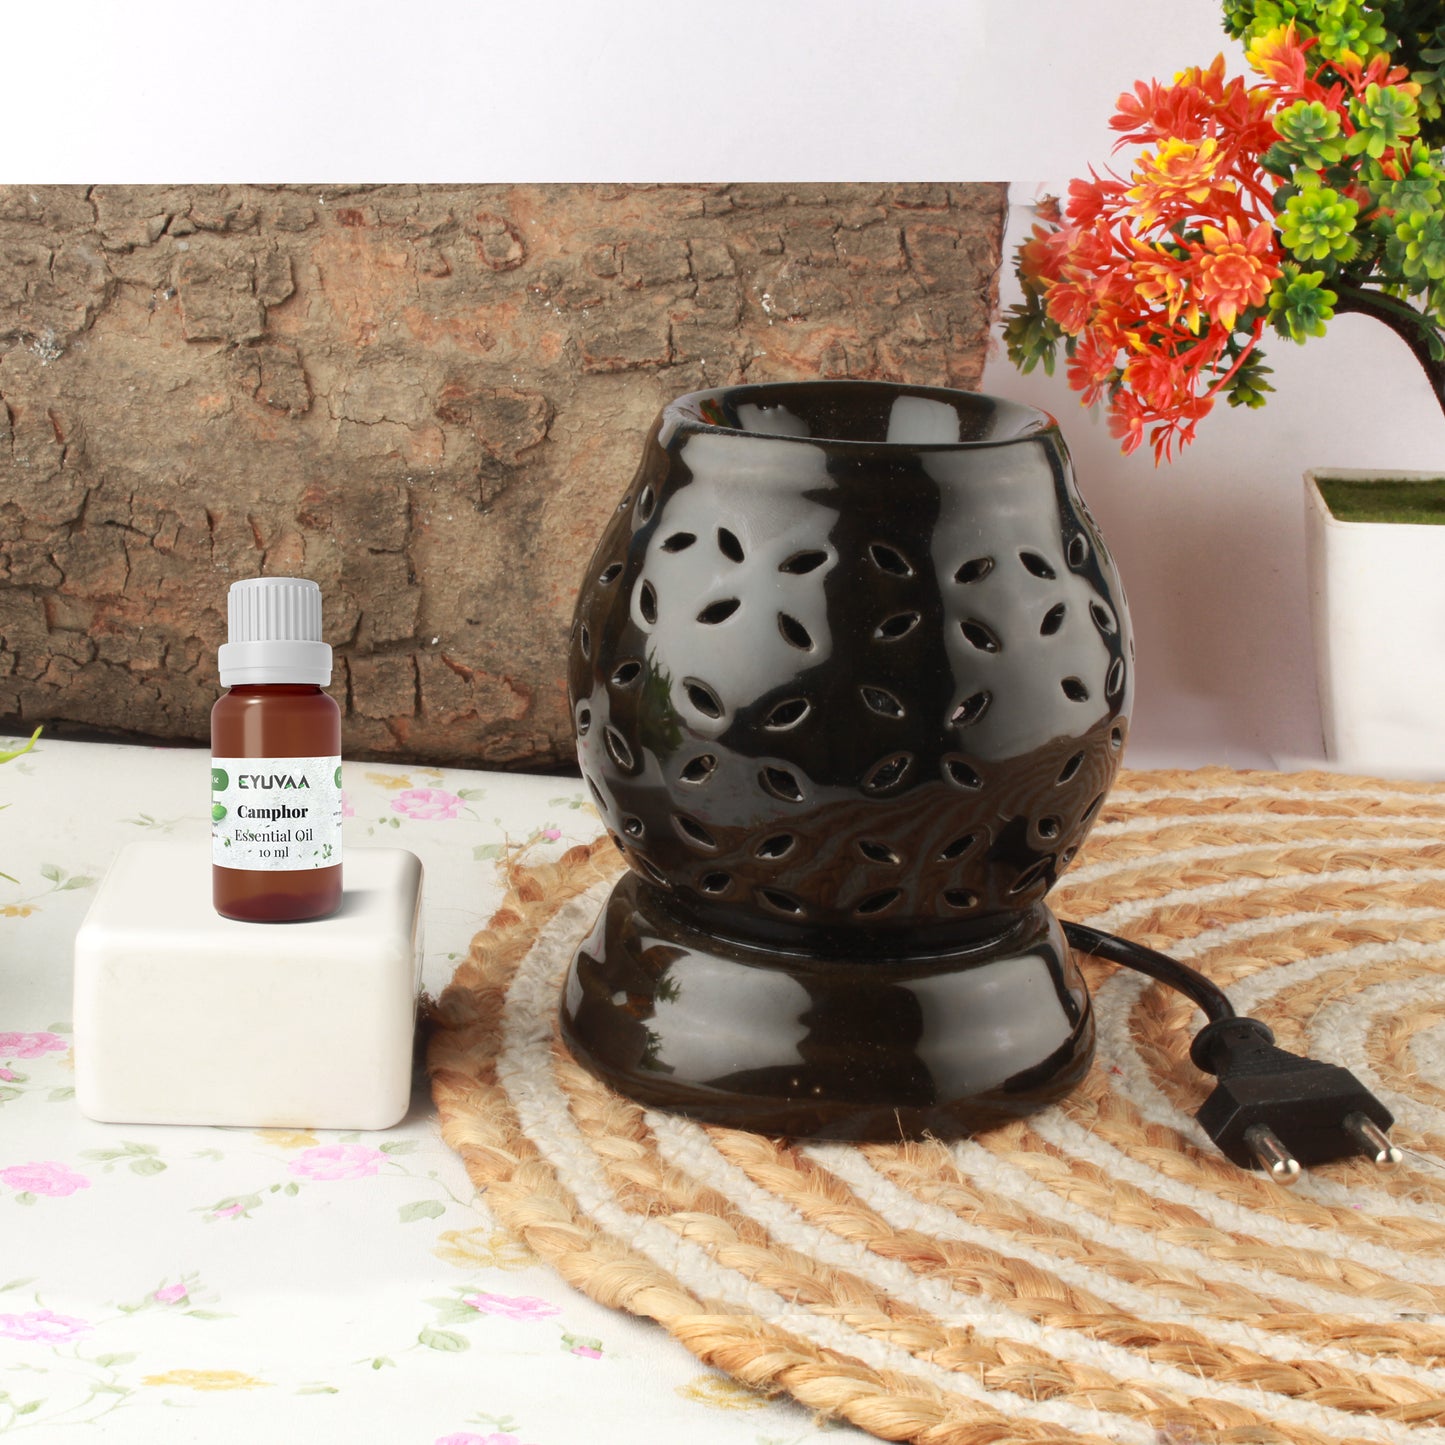 Ceramic Electric Round-Shaped Aroma Diffuser, Oil Burner, Aromatherapy Aroma Ceramic Diffuser with 10 ml fragrance